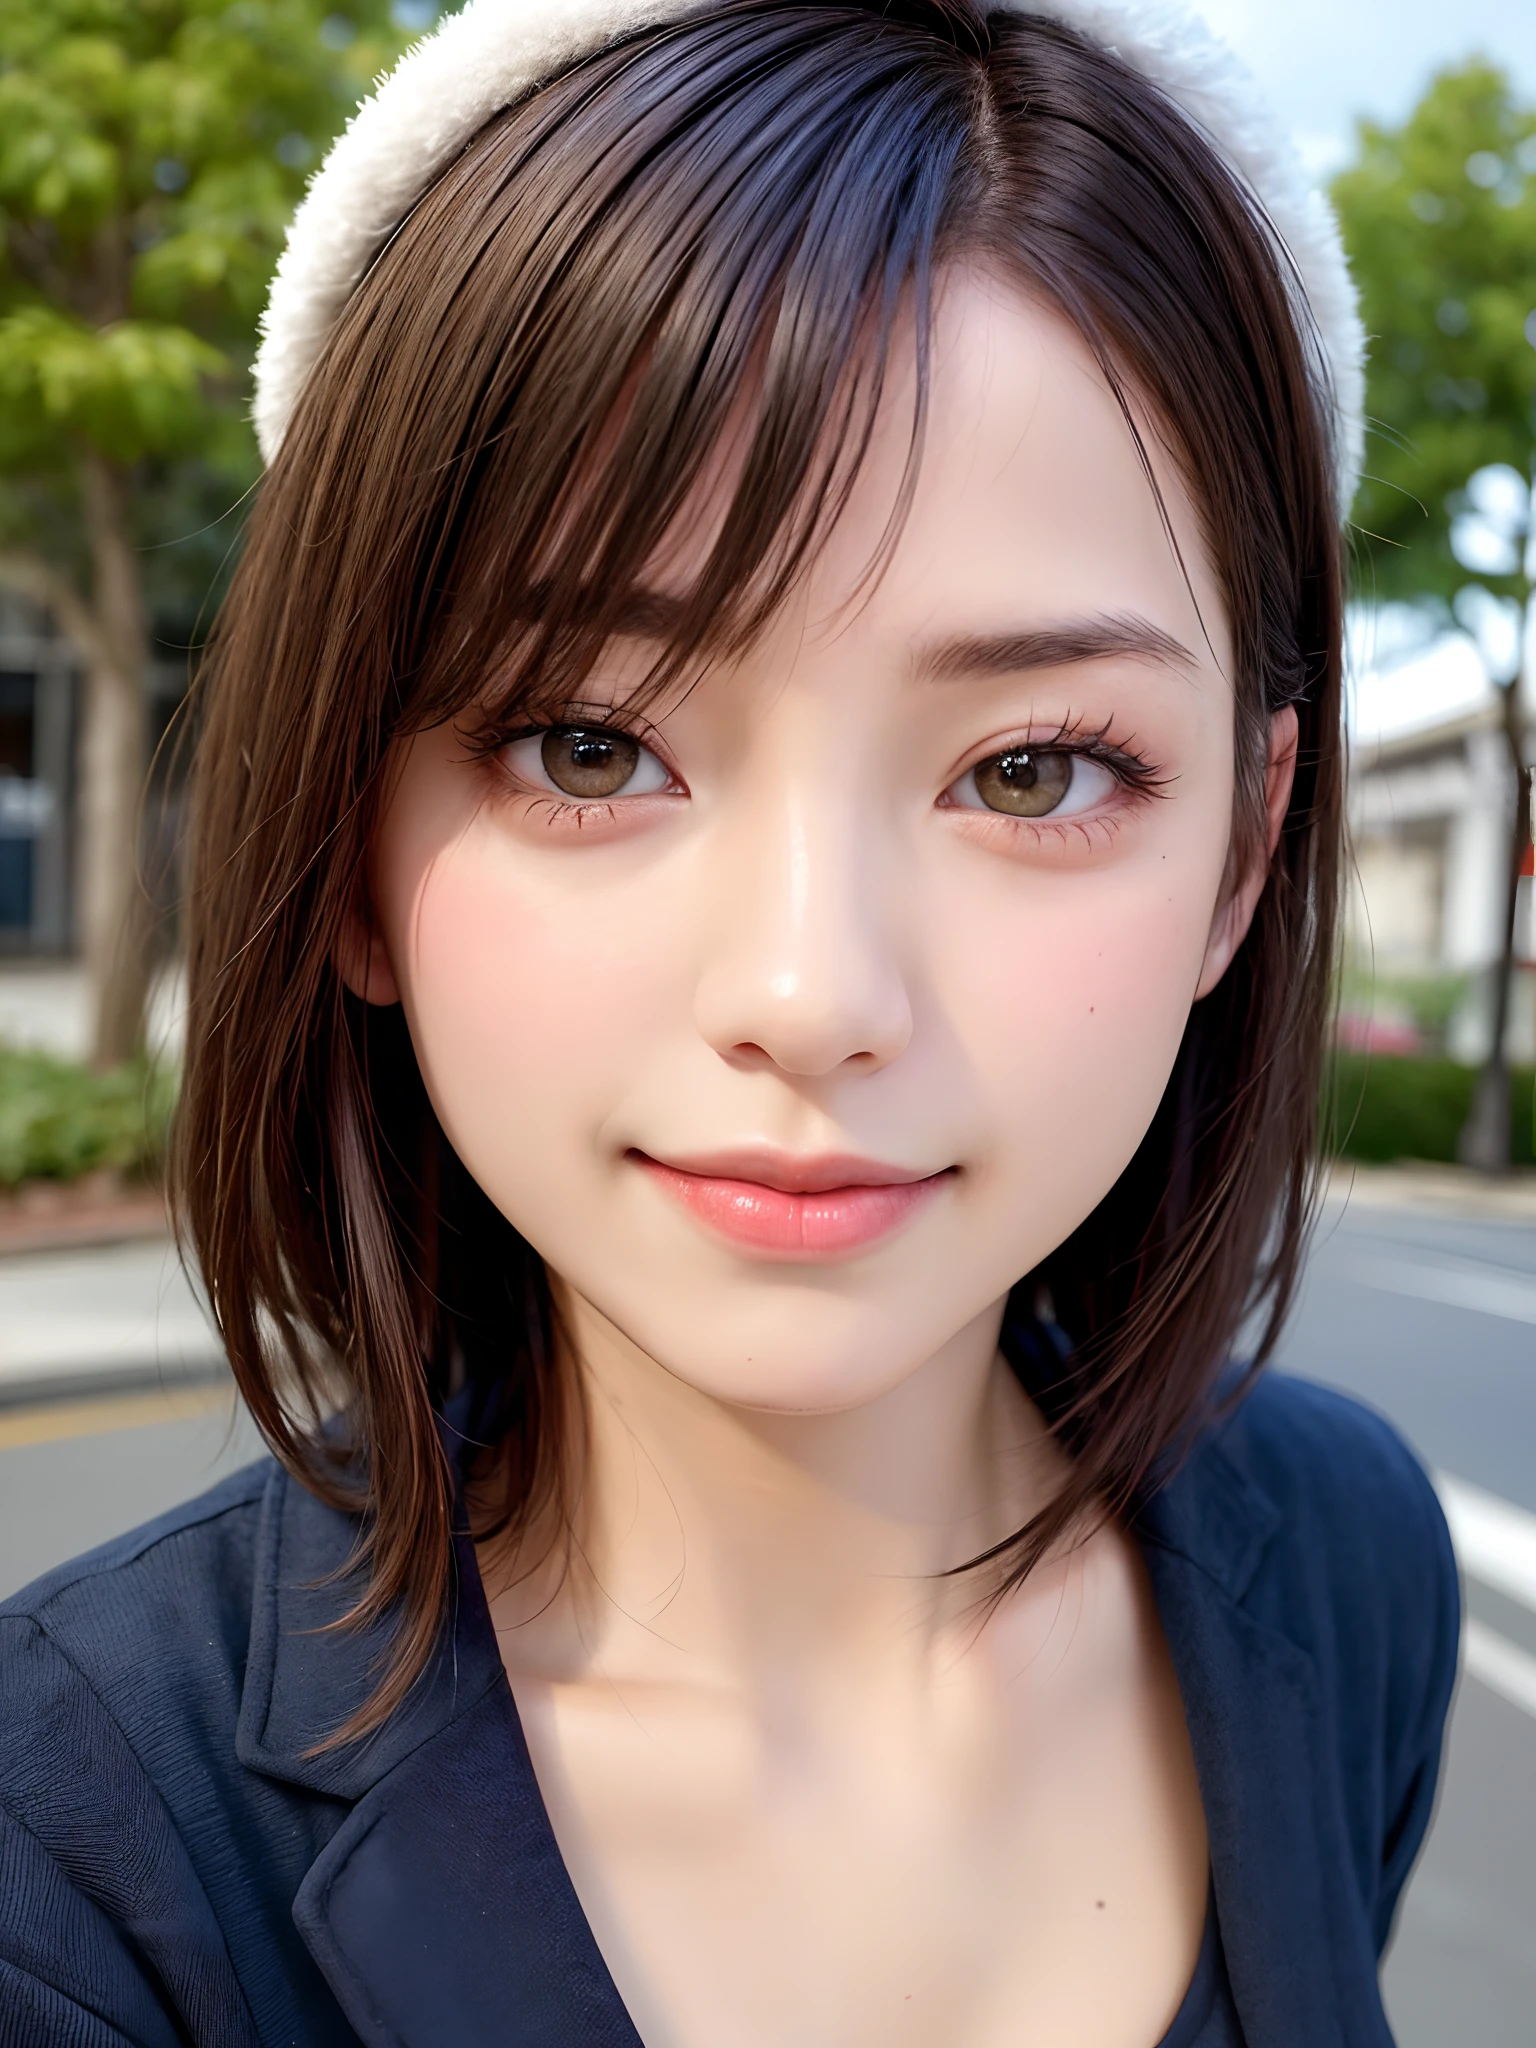 (Face Focus、Very eye focus、Head tilt、Very chest focus、hyper realisitic、Photorealistic、masutepiece:1.4, top-quality:1.4、Add intense highlights to the eyes:1.4、short shiny hair:1.4 ),1girl in, solo, short dark hair, scarf, Hats,, realisitic, looking at the viewers, brown eyes of light color,, shorth hair, coat, Winter clothes, White headscarf, s lips, Lip Gloss:1.4，bangss,a closed mouth, The upper part of the body、big eye、Lashes、((Street))、((Shorthair with bangs:1.4、big eye、Put very strong highlights in your students、{gigantic|Big|Huge|mega} breasts, cleavage、very Bigger breasts、gazing at viewer、Very beautiful beauty、Put your ears out、long neck、little smiling、Close your mouth and smile)))、Beautiful adult woman full of charm:1.4、(Autumn leaves are blue without people or cars々tree-lined street)